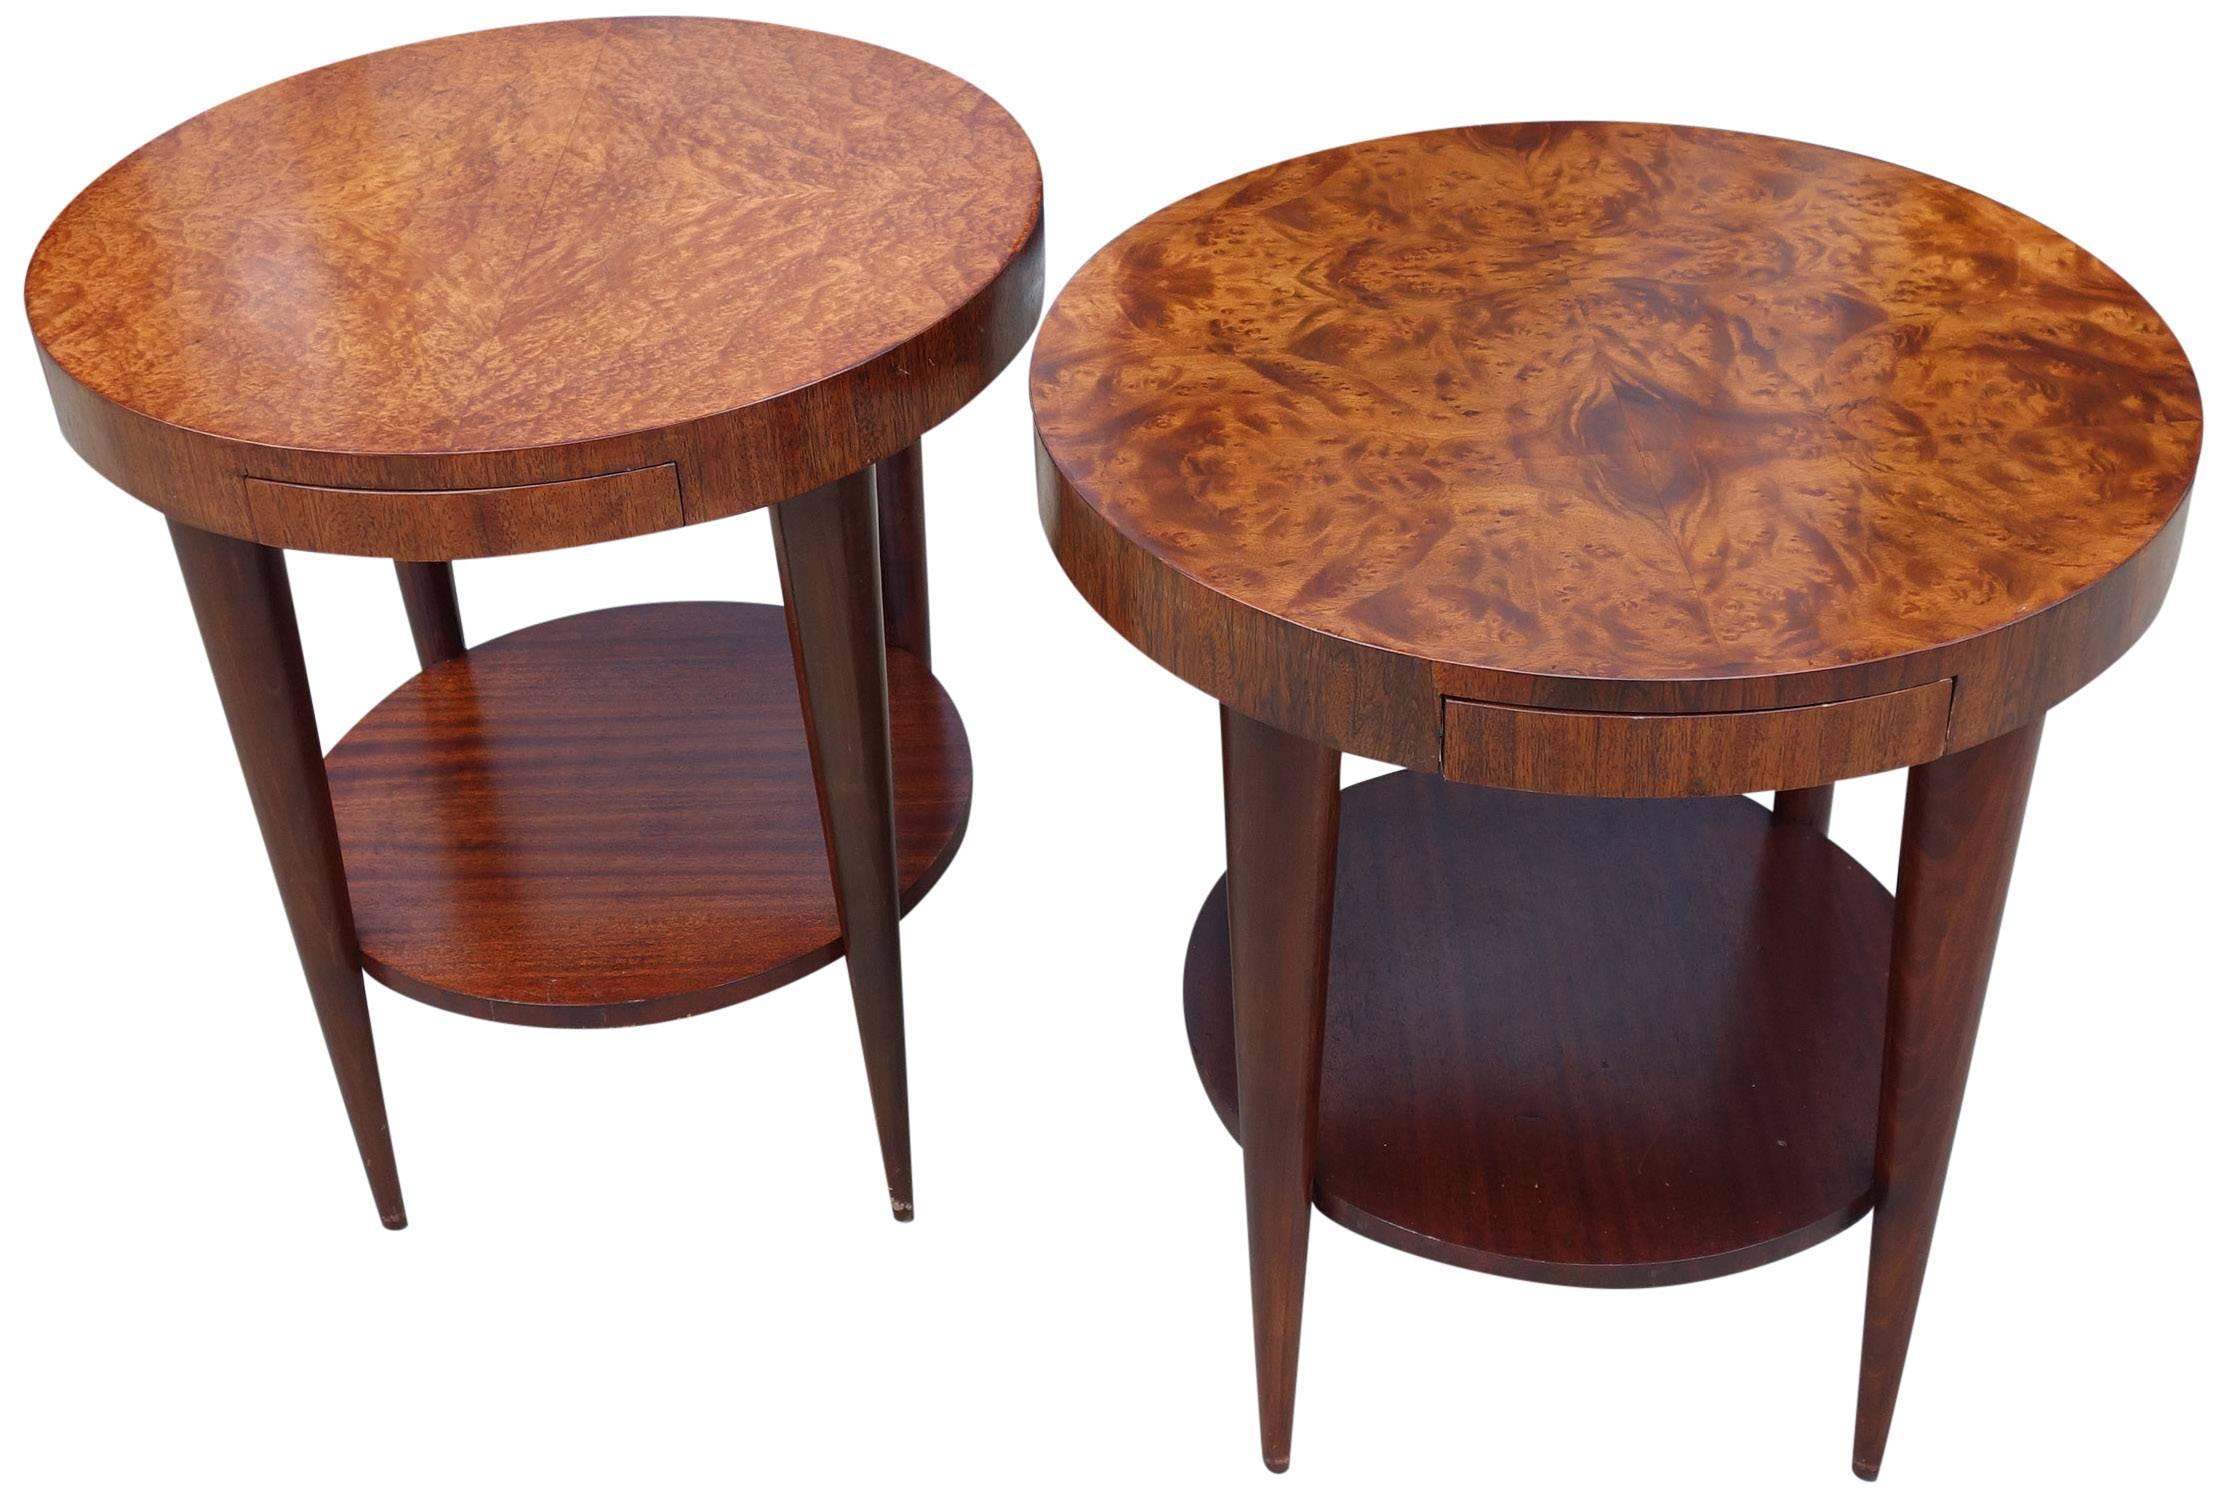 Exceptional pair of burl wood Paldao occasional tables by Golbert Rhode for Herman Miller. His works, especially when incorporated with burl wood, are highly sought after. Rhode is one the founding fathers of American Modernism. He designed mostly